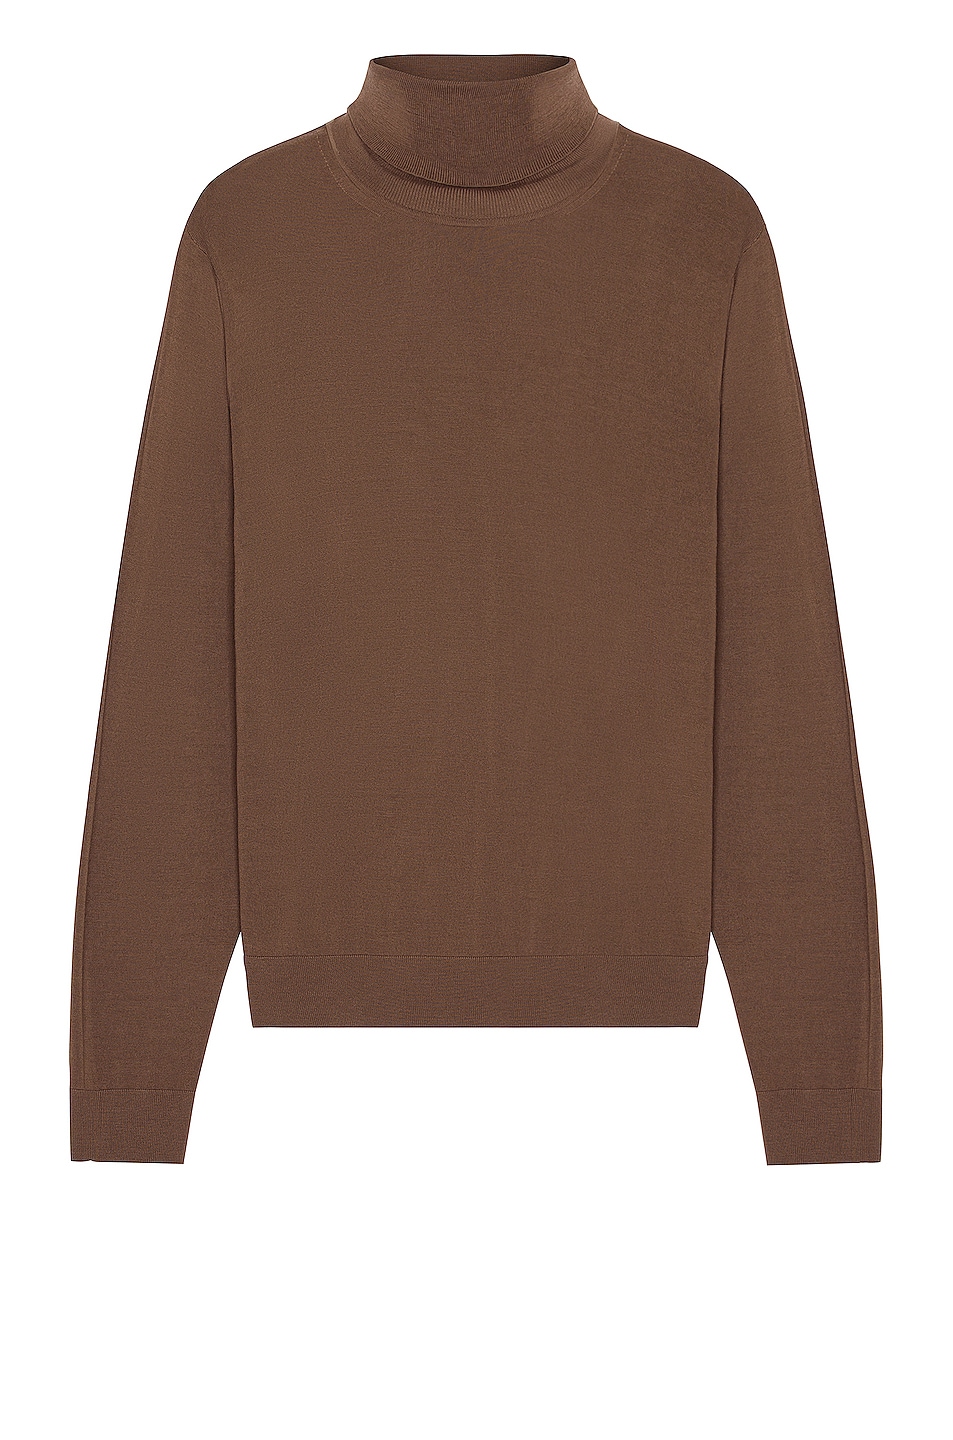 Image 1 of The Row Elam Top in Warm Taupe